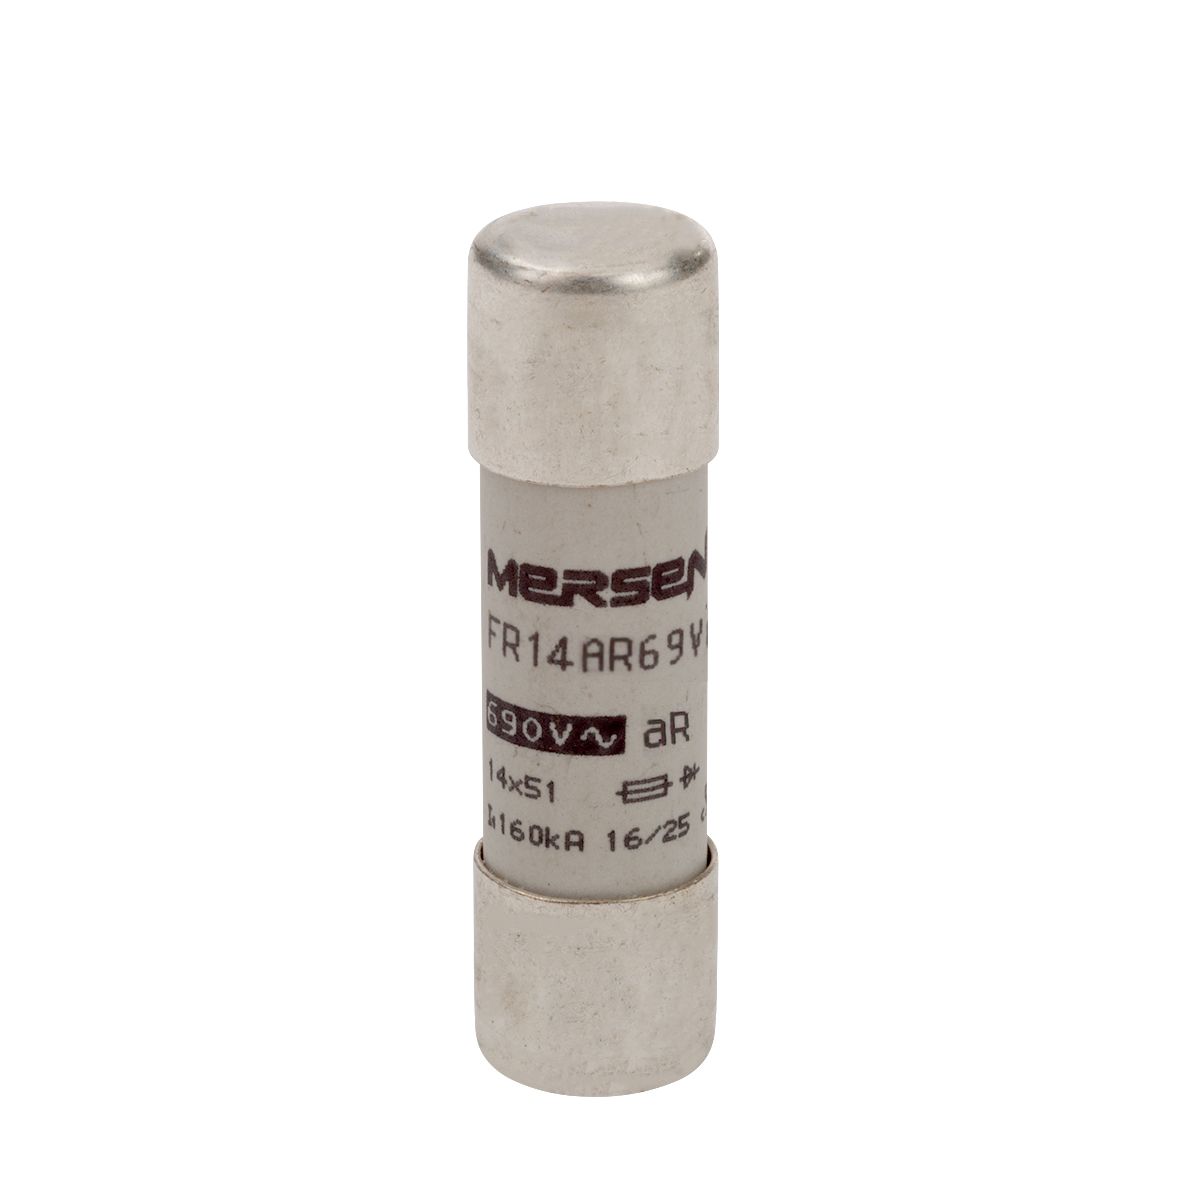 L1027328 - Cylindrical fuse-link aR 690VAC 14x51, 12A, without indicator